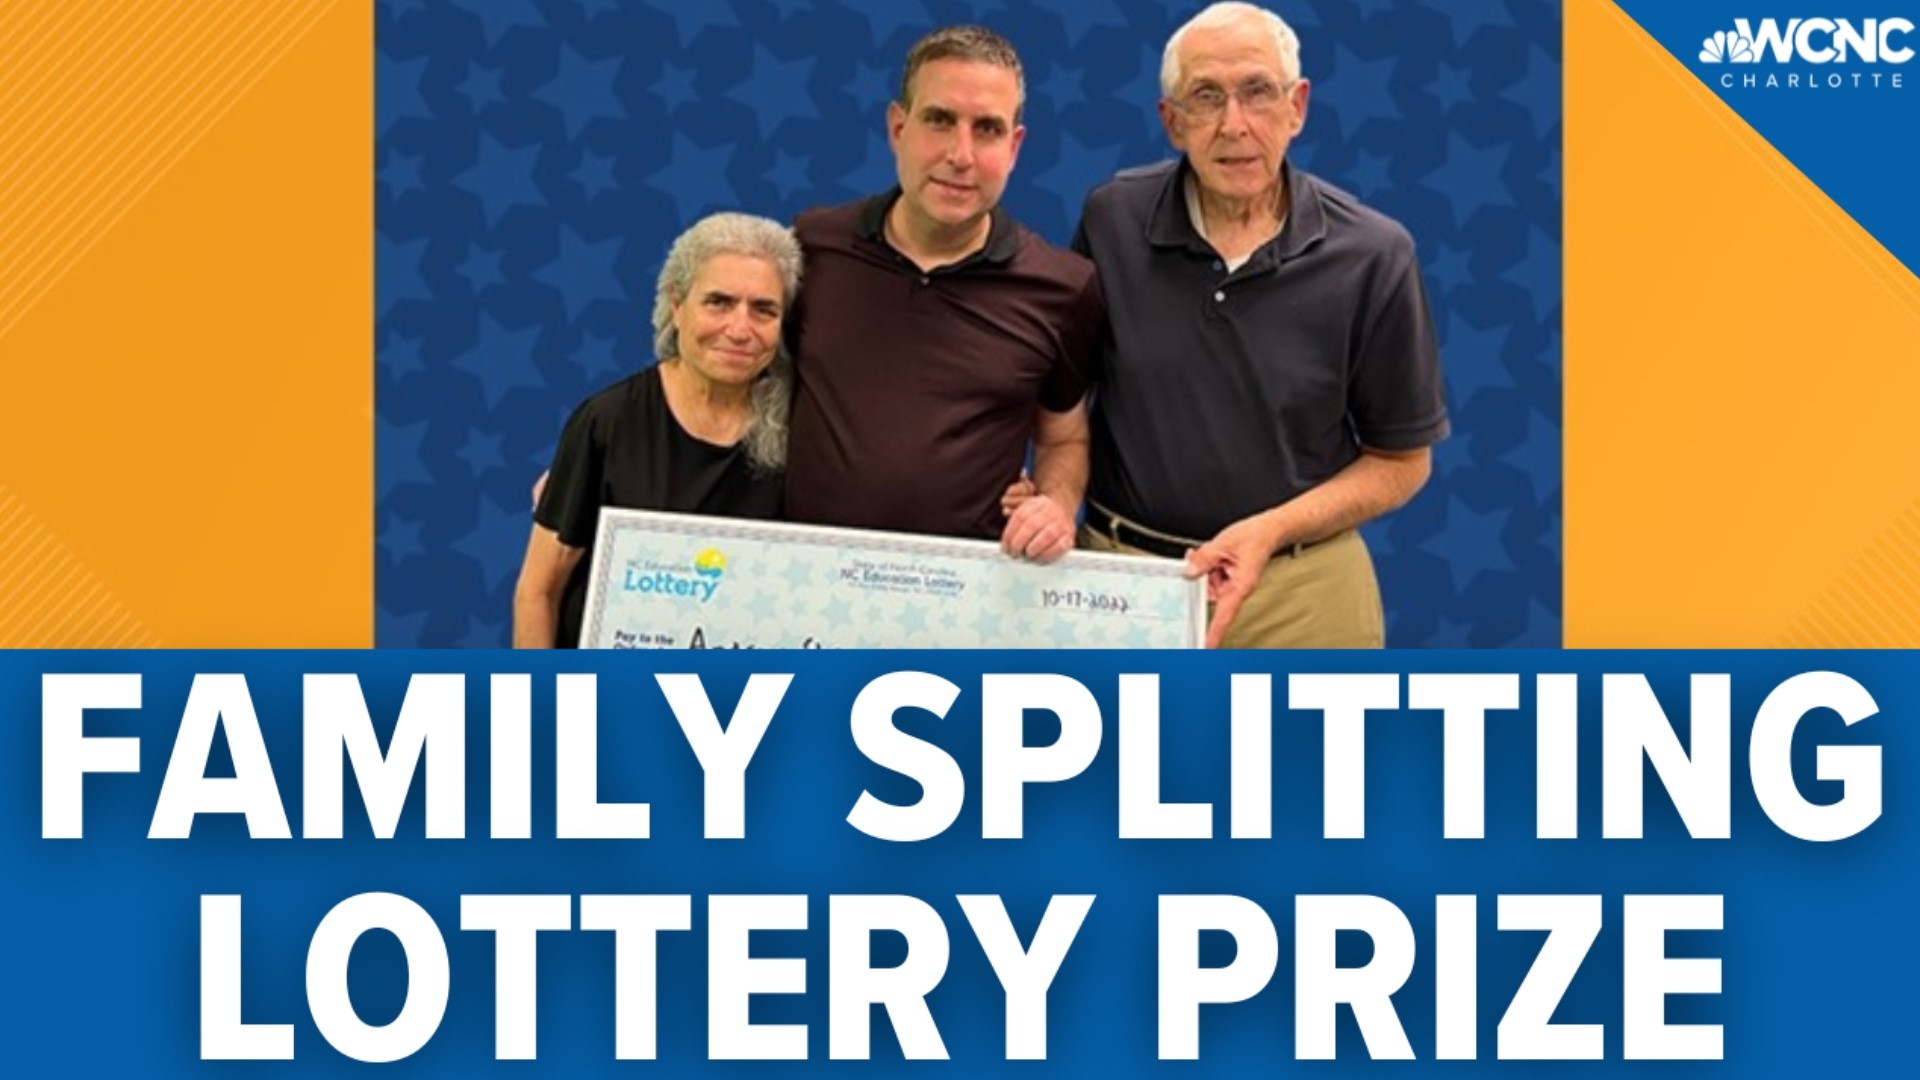 A Rowan County family who likes to play the lottery together won big on a ticket.